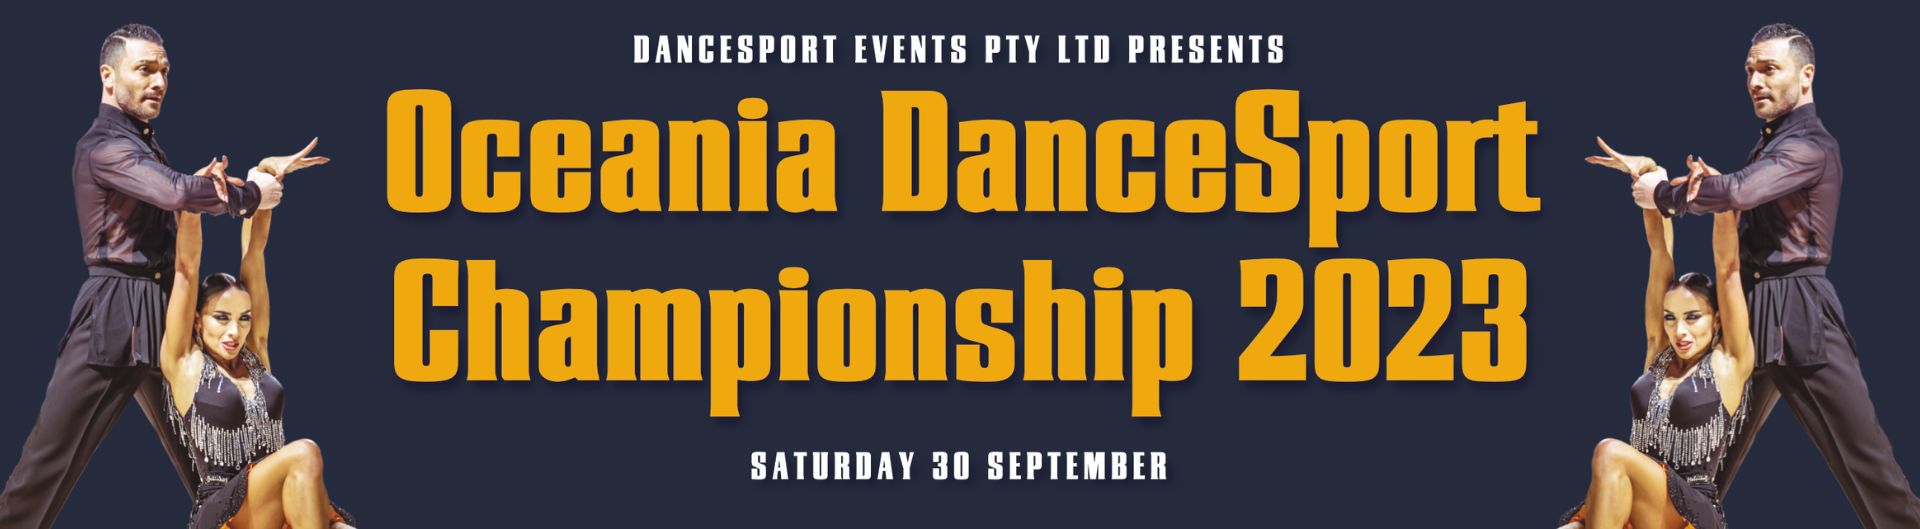 Oceania DanceSport Championship is coming to ICC Sydney on 30 September 2023.